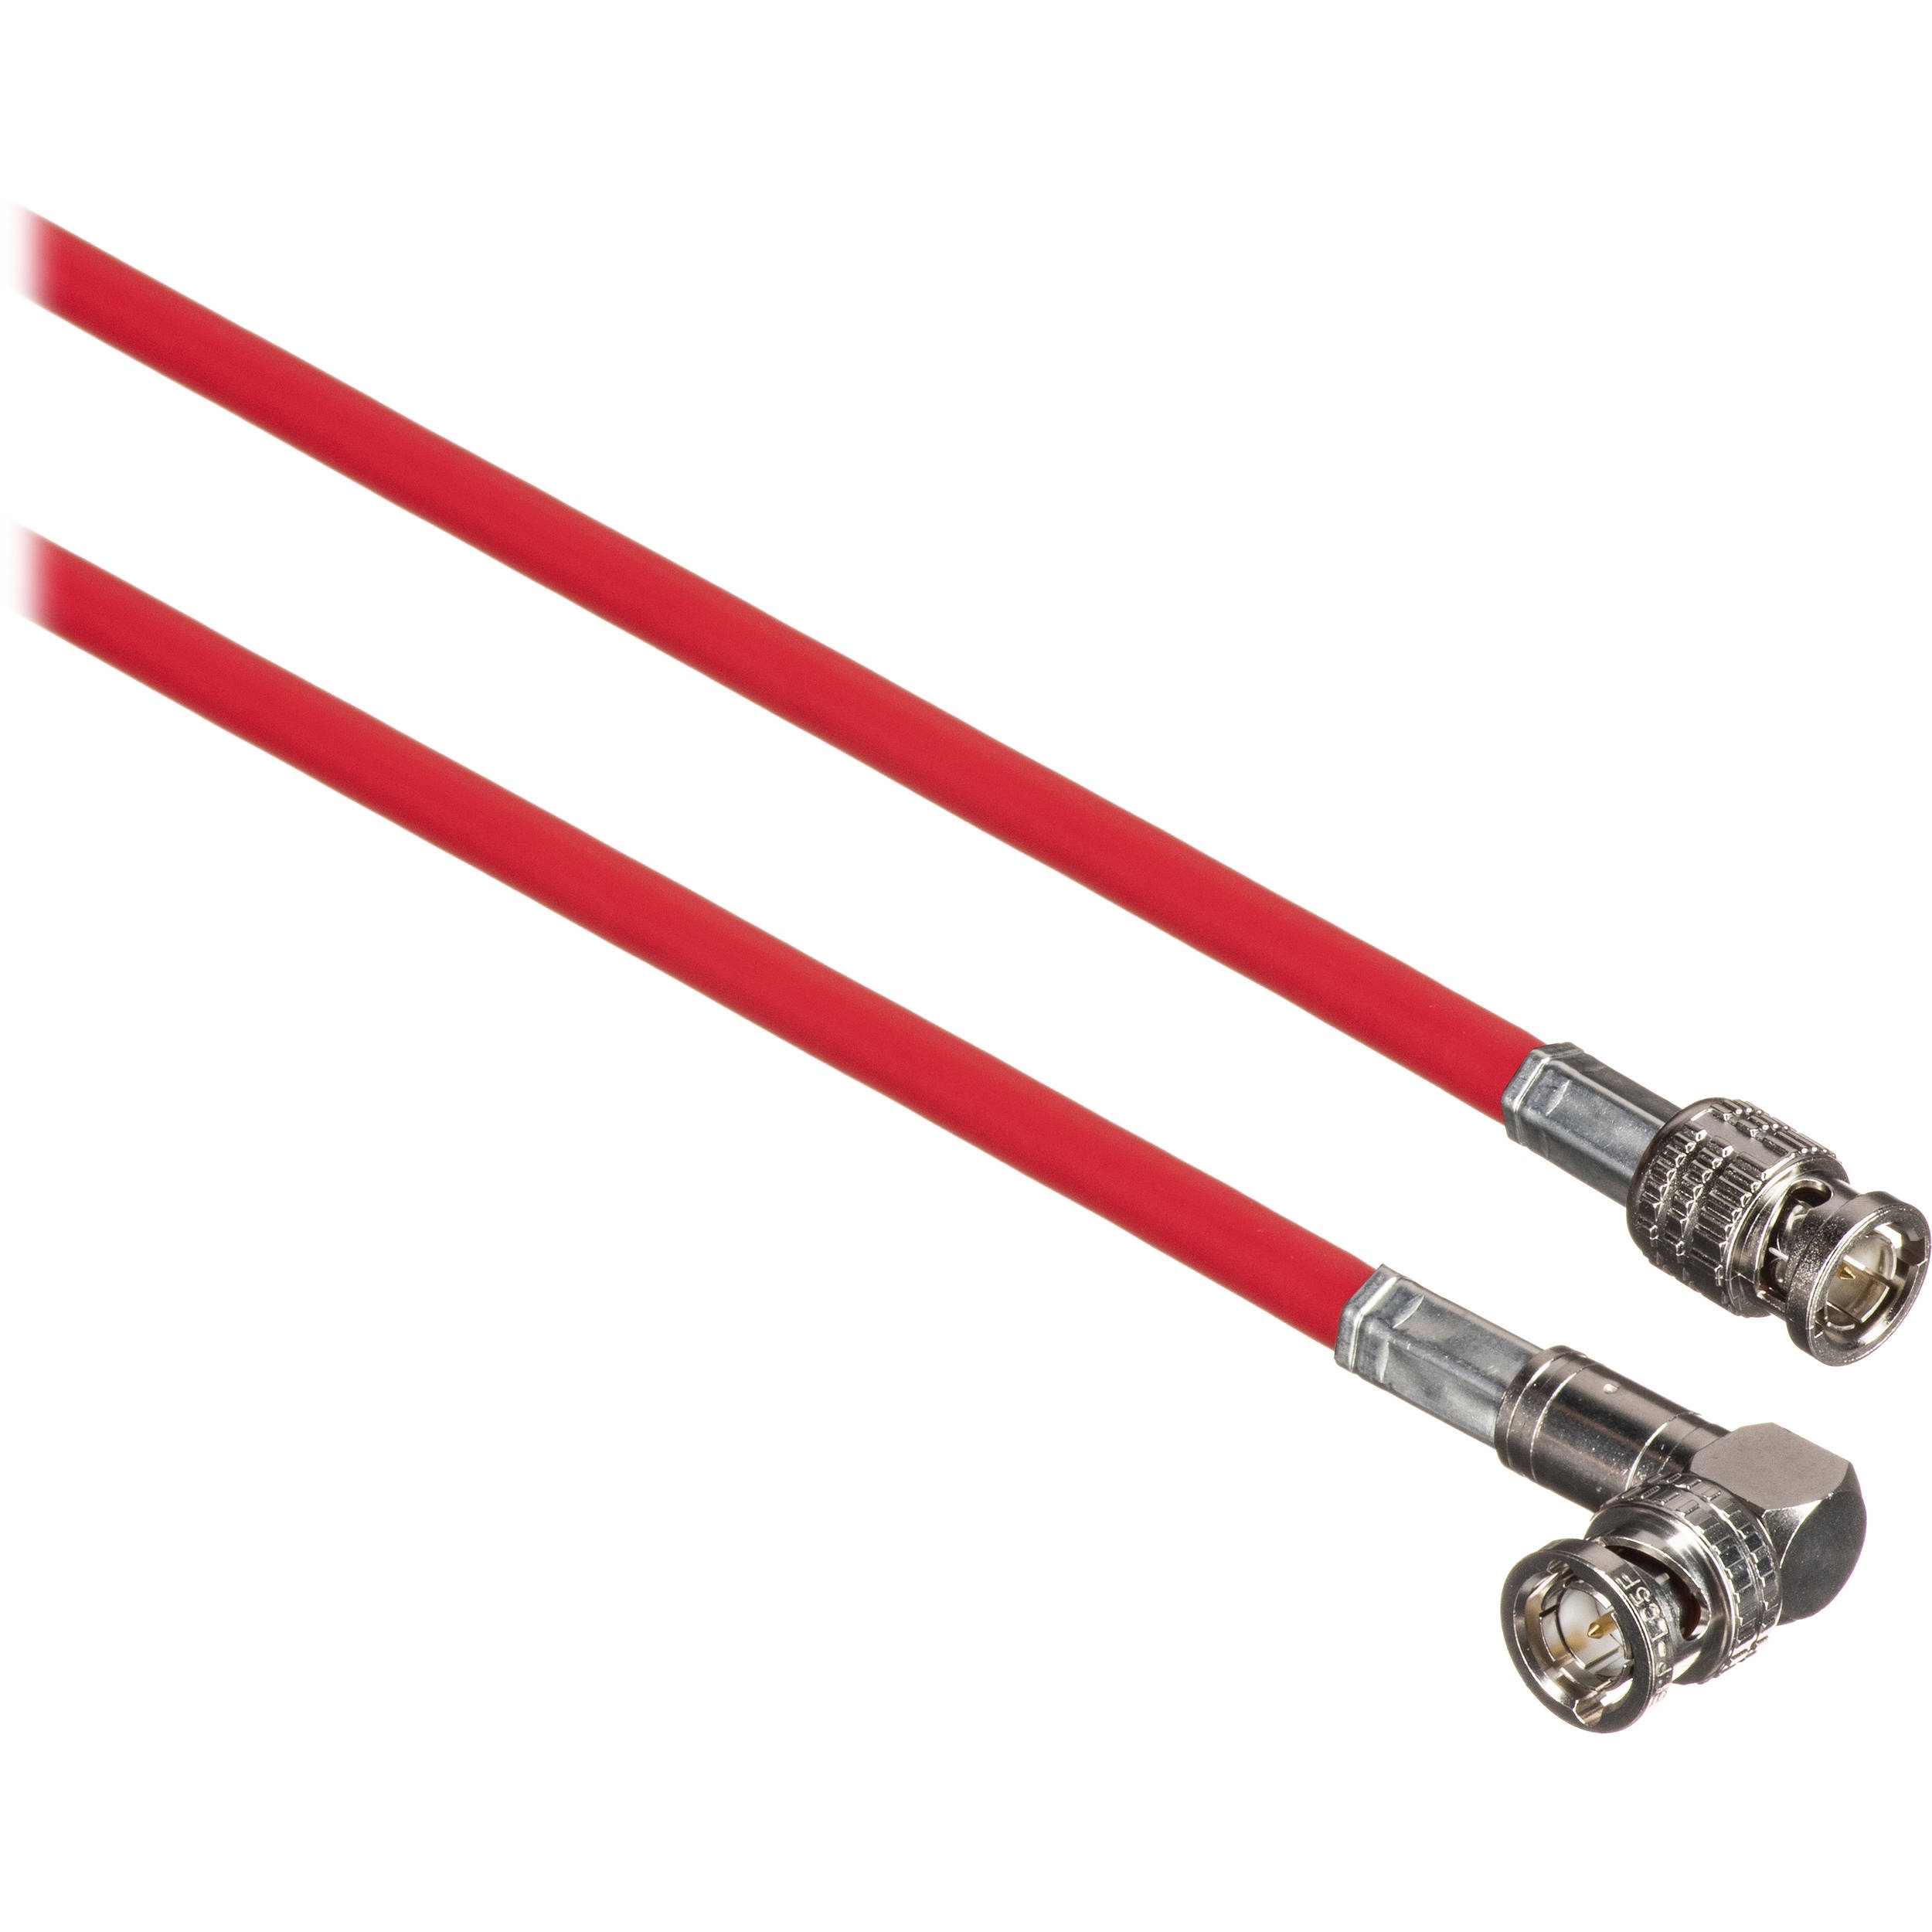 Canare Male to Right Angle Male HD-SDI Video Cable (Red, 6')